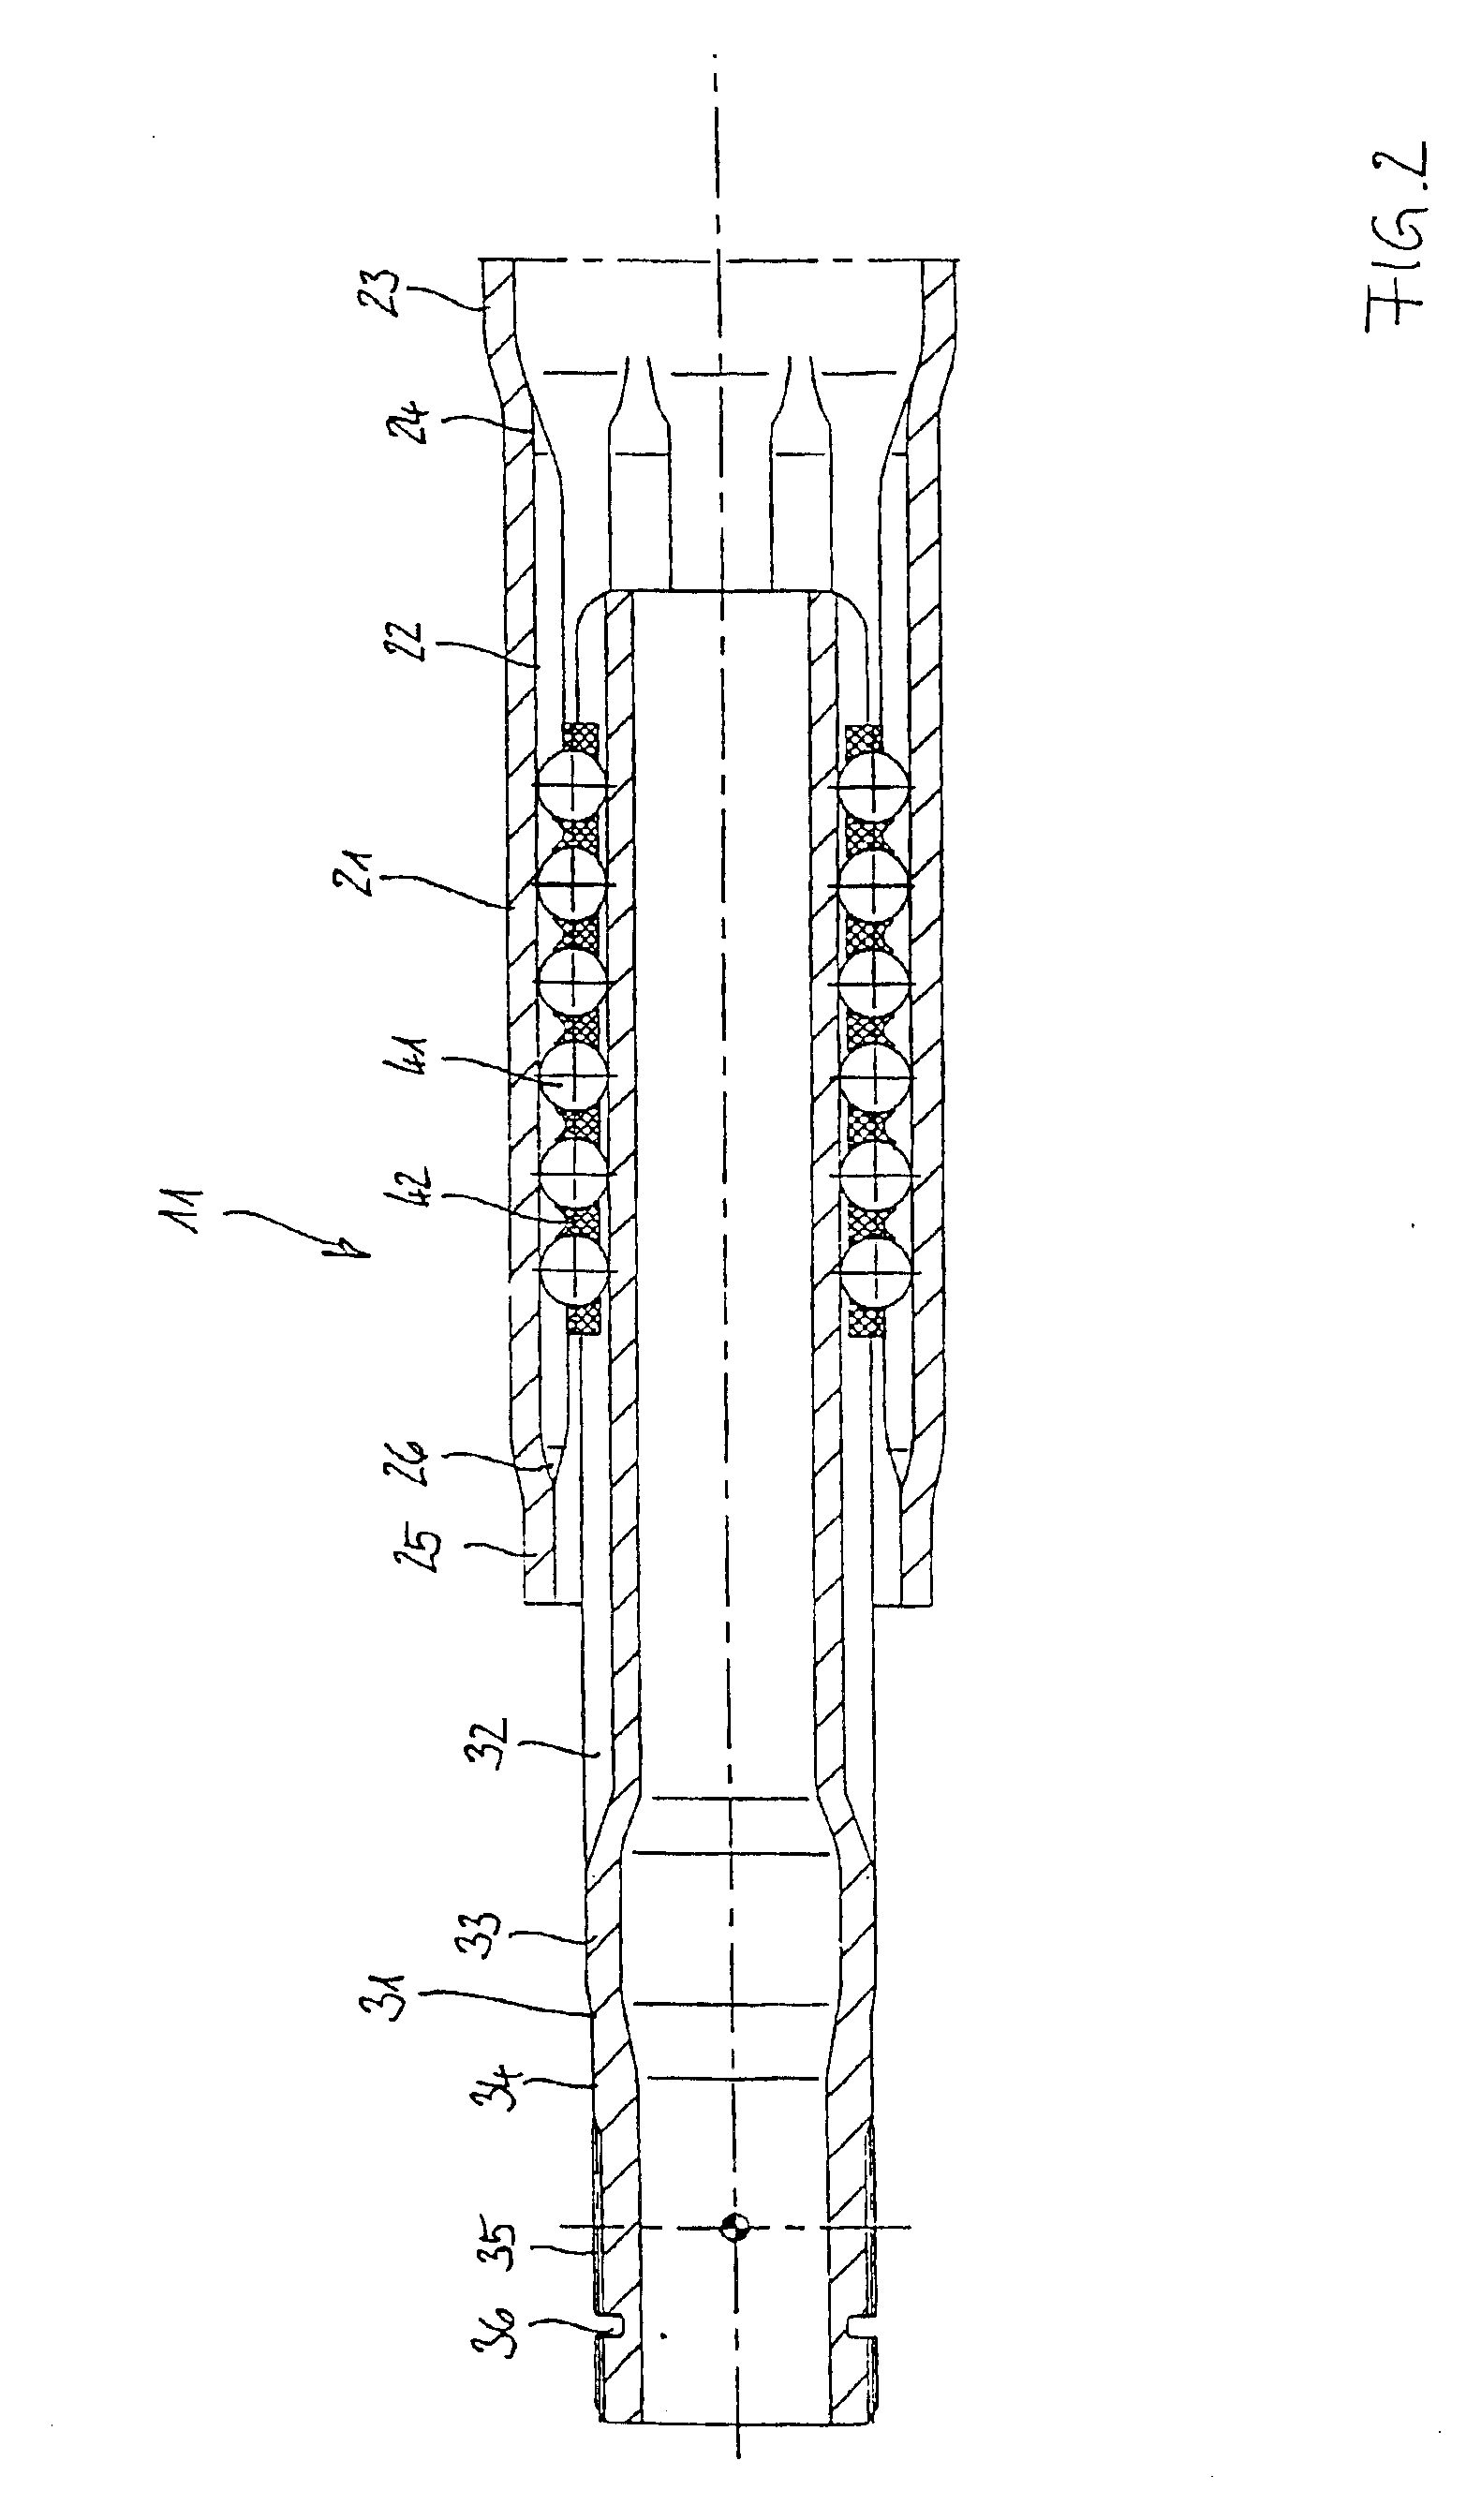 Longitudinal plunging unit with a hollow profiled journal